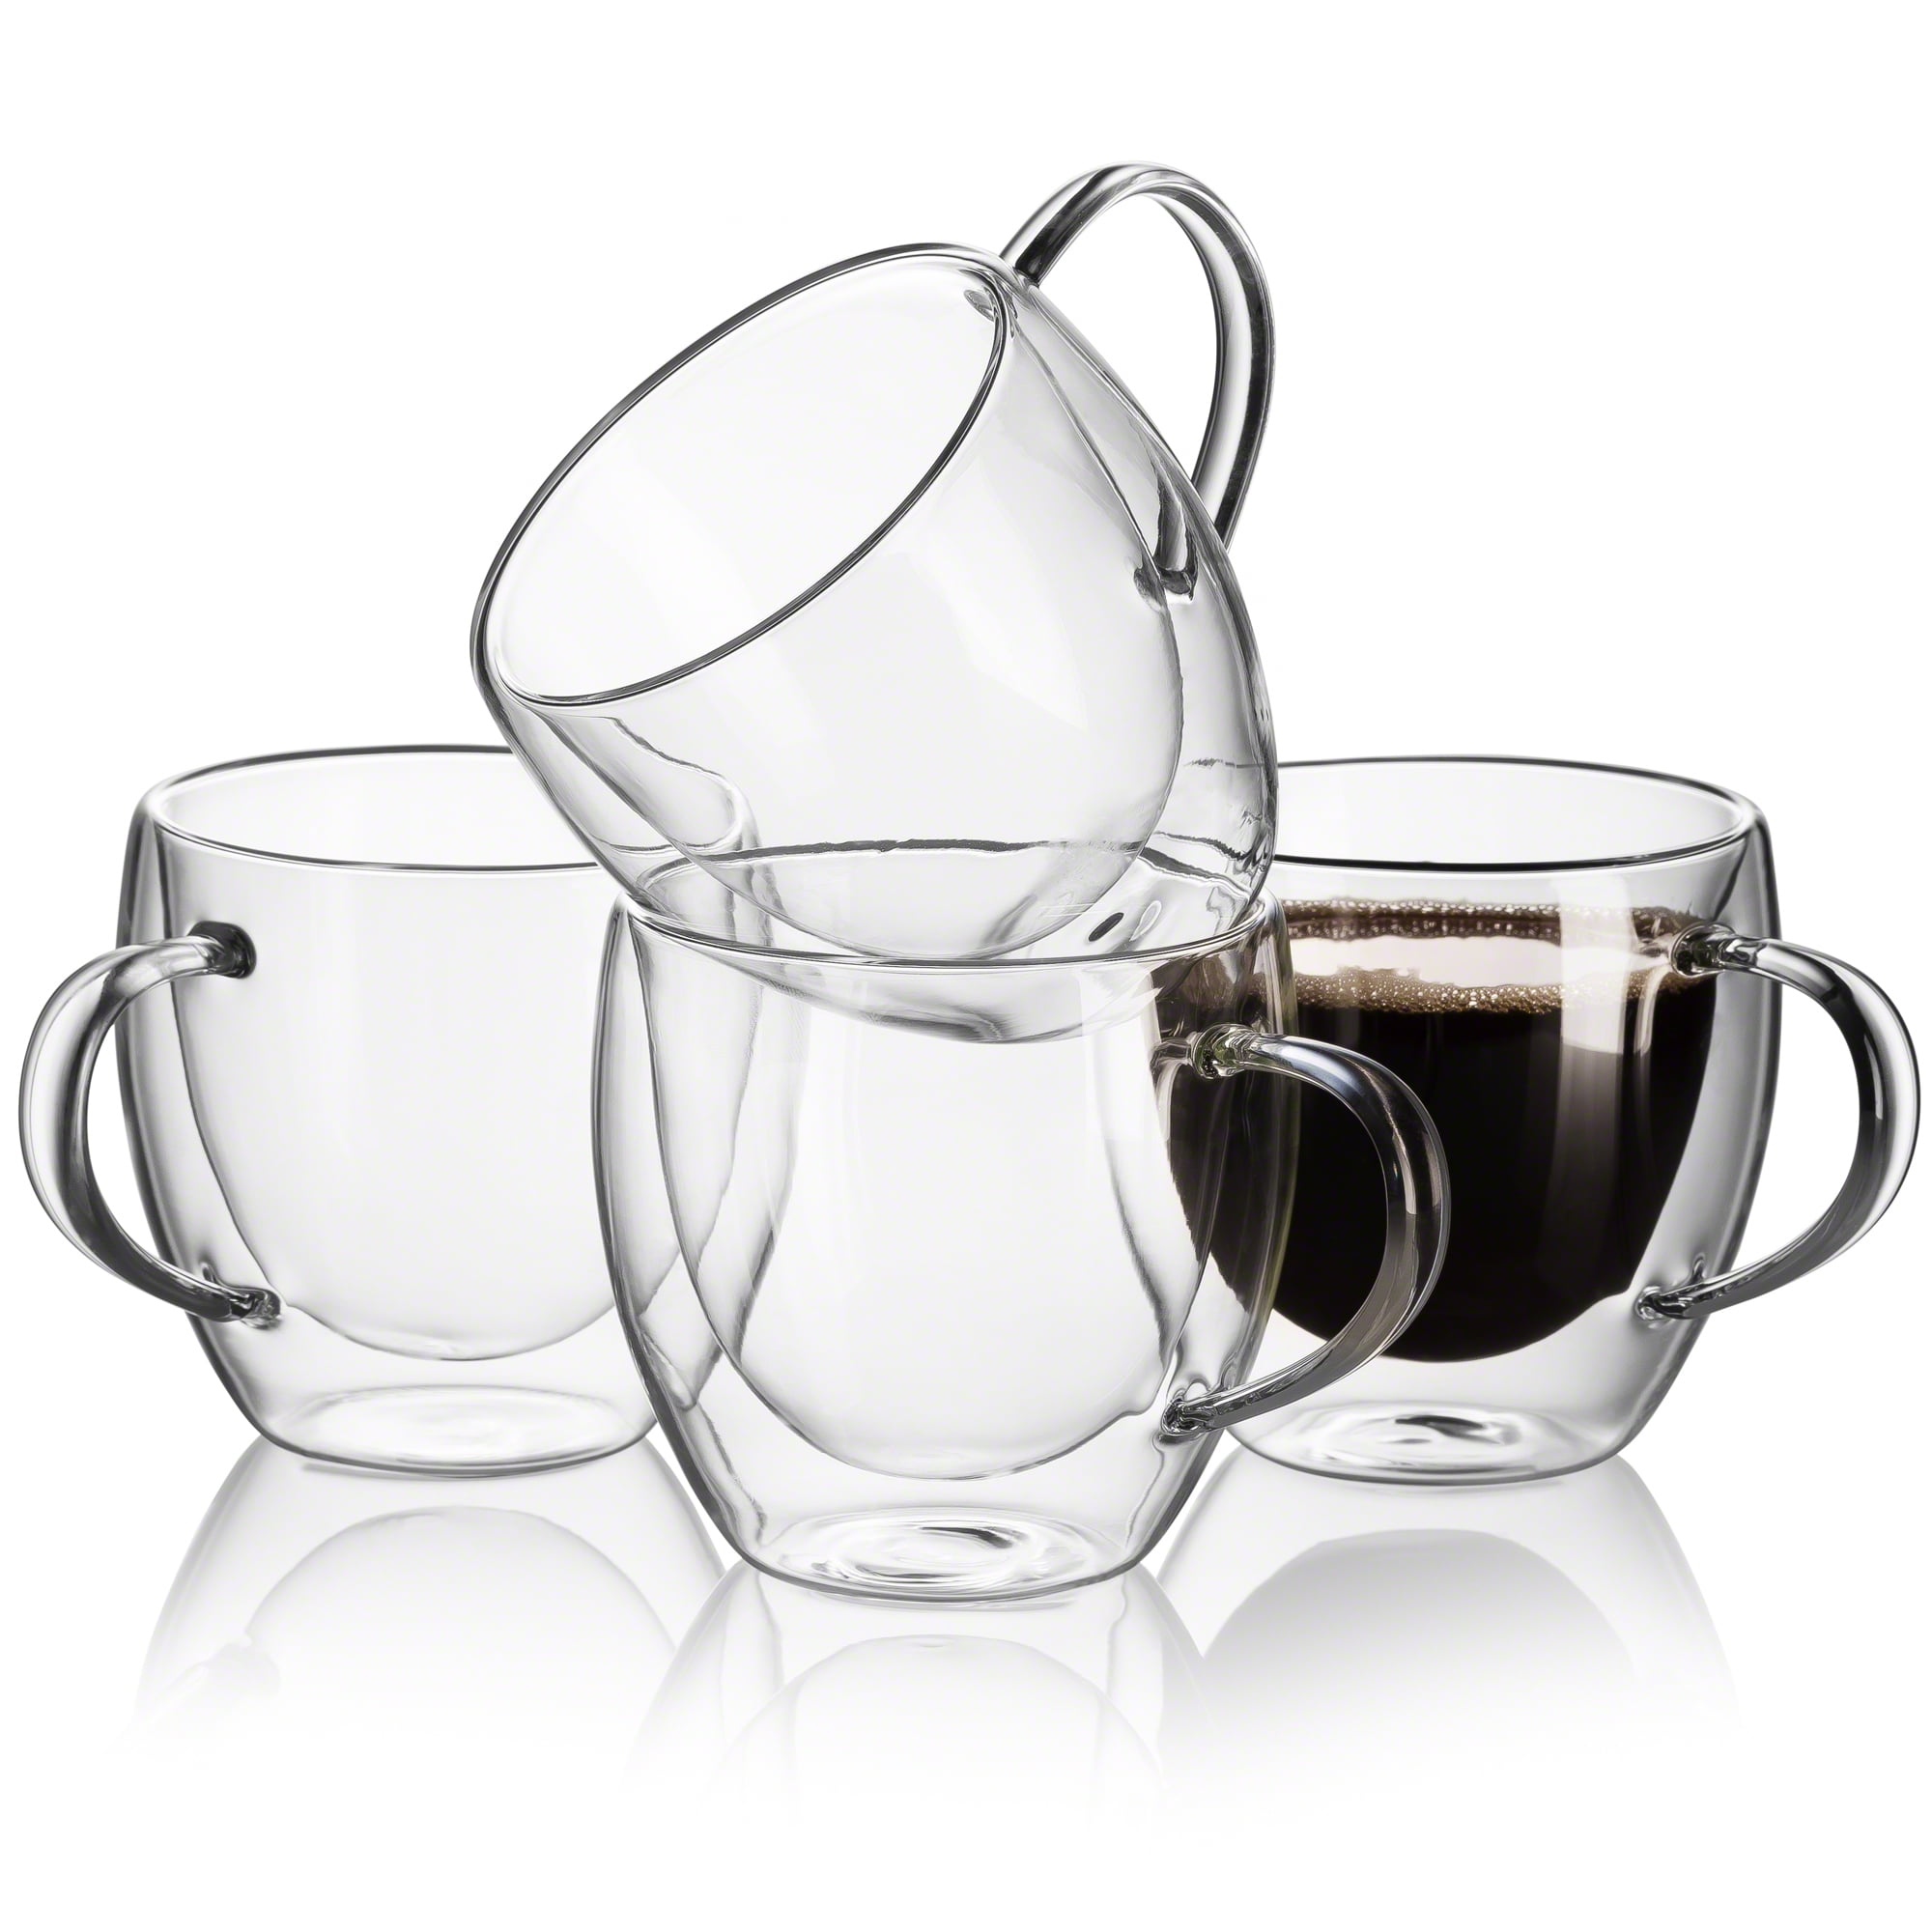 90ml HLIN Coffee Cup Set Double Walled Coffee Mugs Stainless Steel Cup & Saucer 3 Ounce